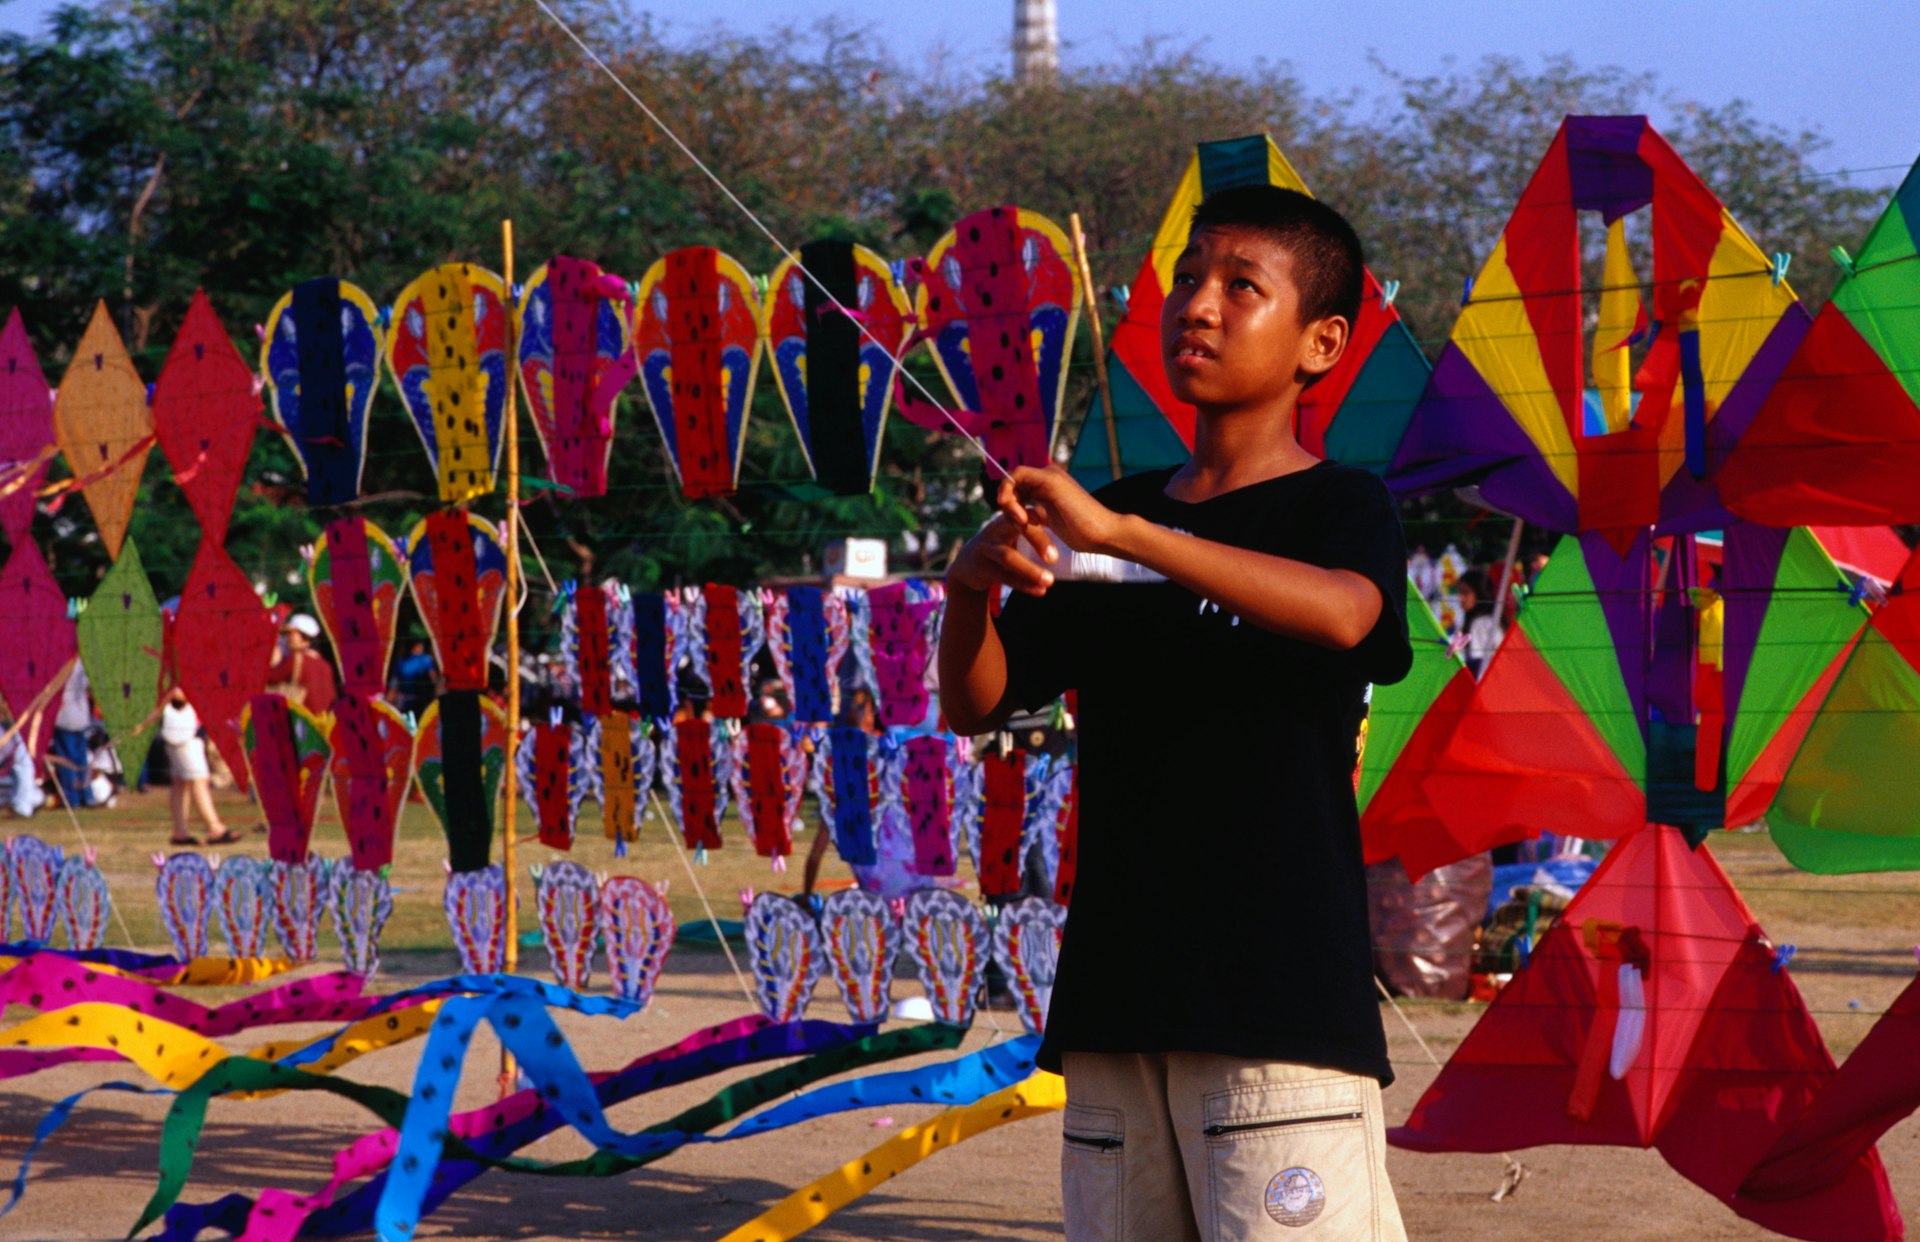 A young Thai boy flies a kite at Sanam Luang Park in Bangkok in front of a stall selling lots of colorful kites.